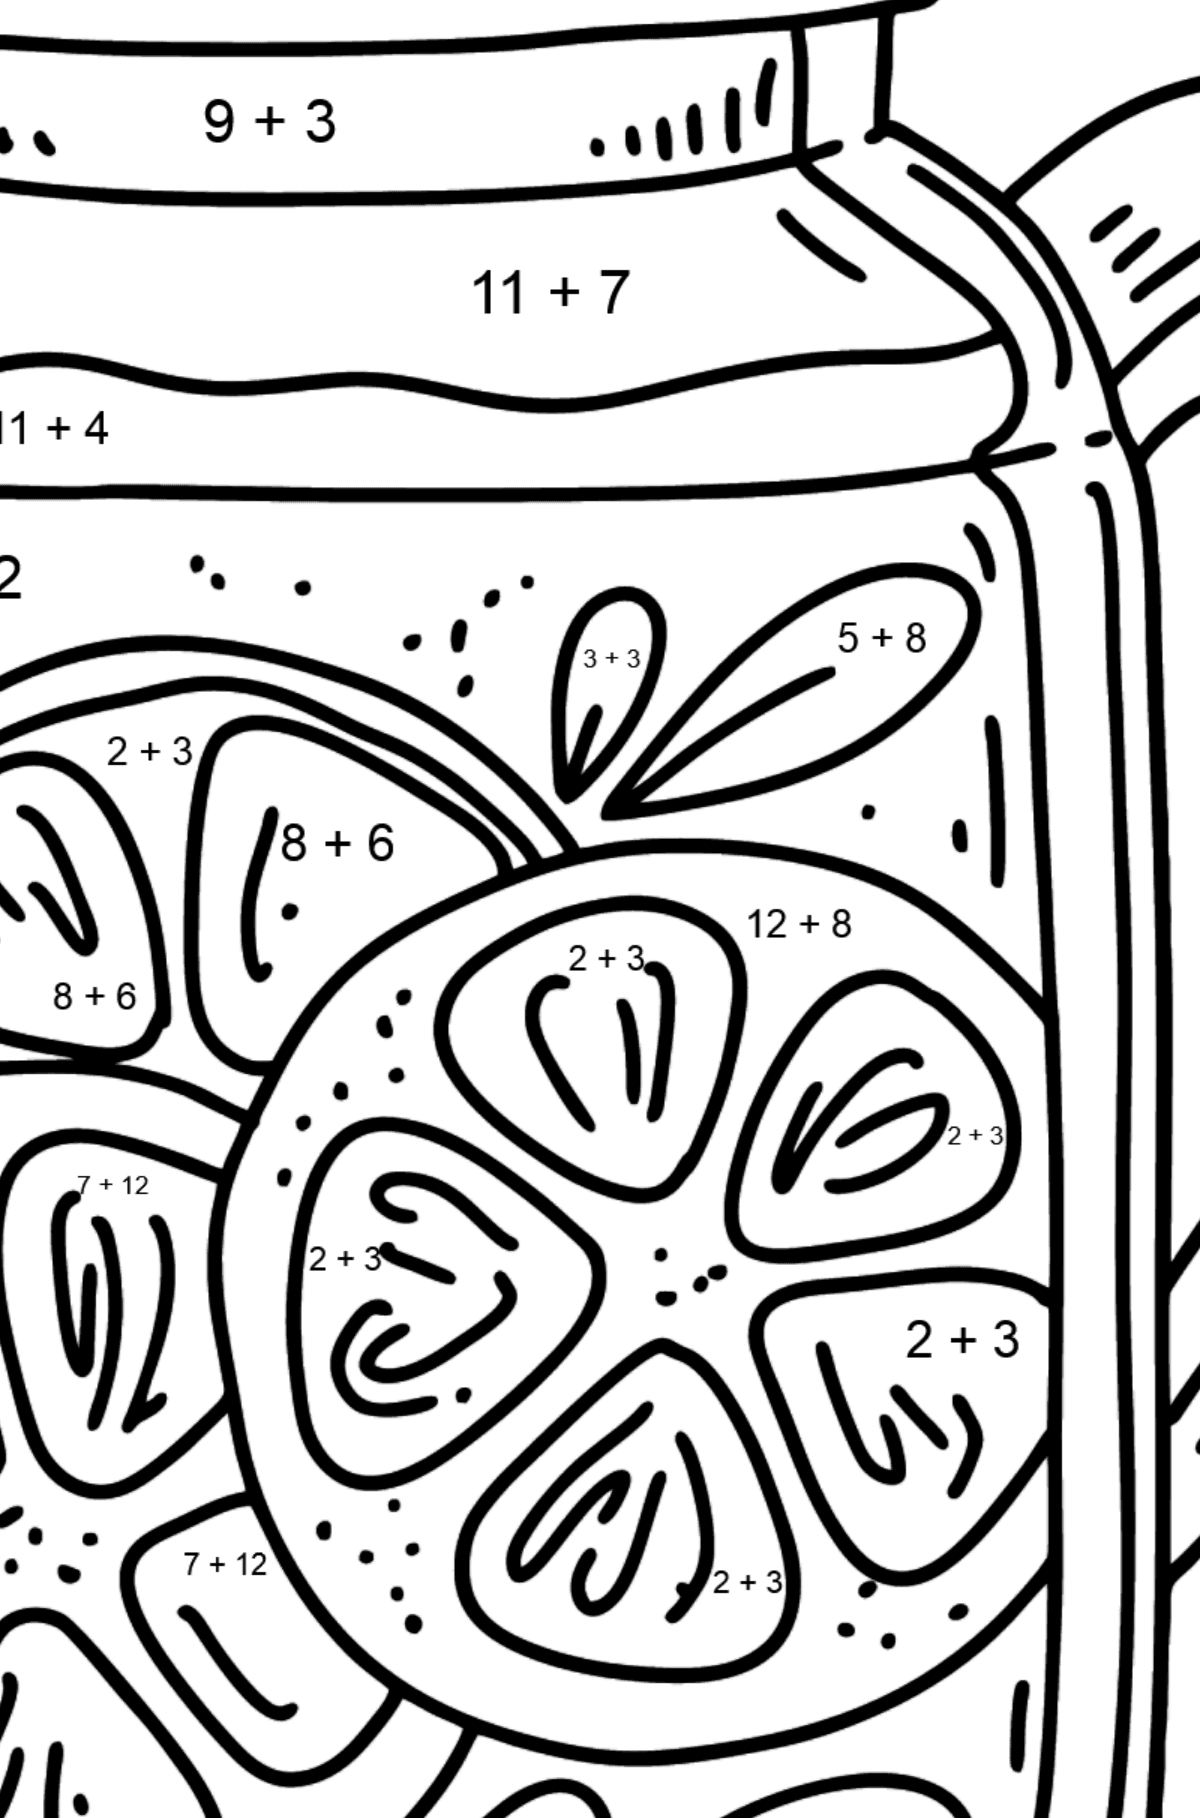 Delicious Lemonade coloring page - Math Coloring - Addition for Kids